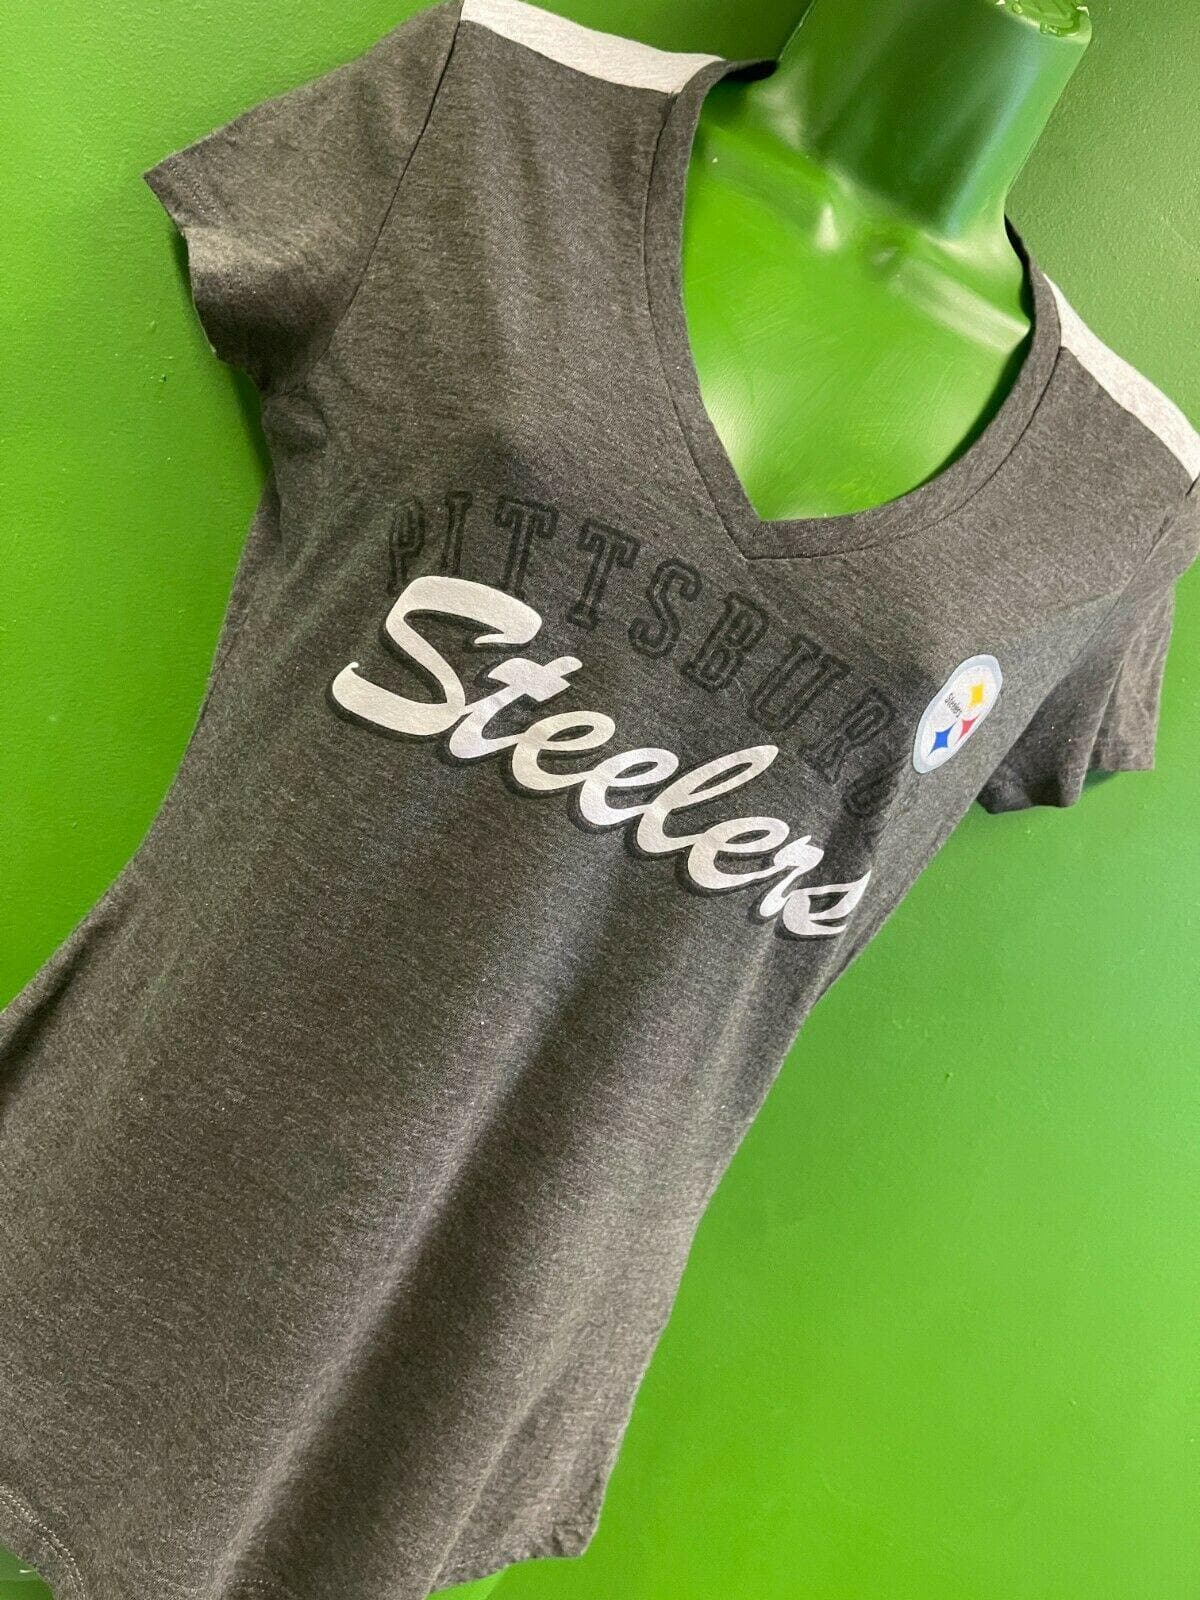 NFL Pittsburgh Steelers Soft Girly Cut T-Shirt Women's Small